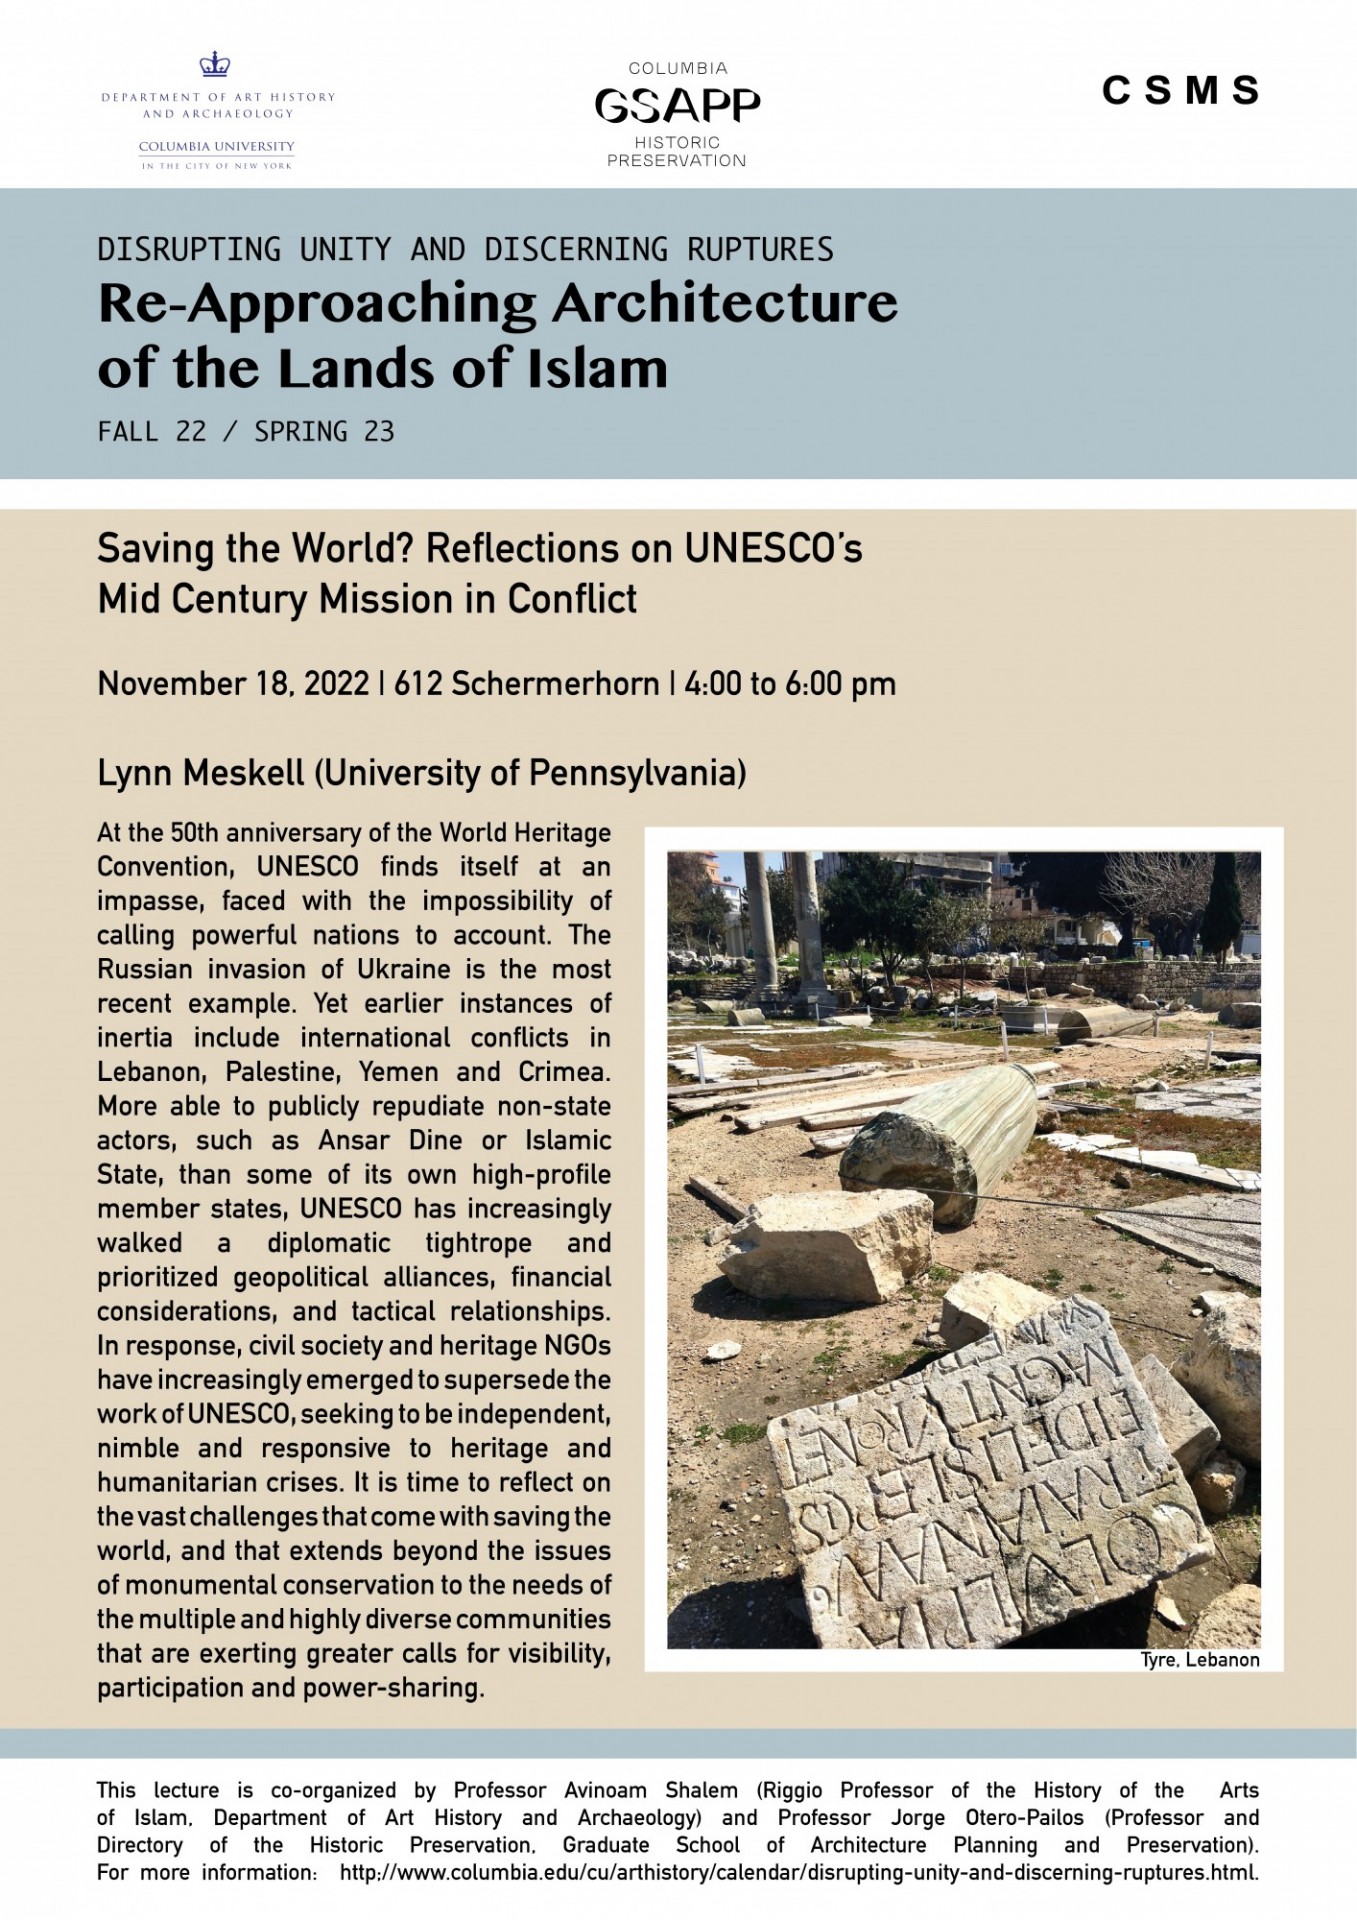 Poster for Lynn Meskell lecture